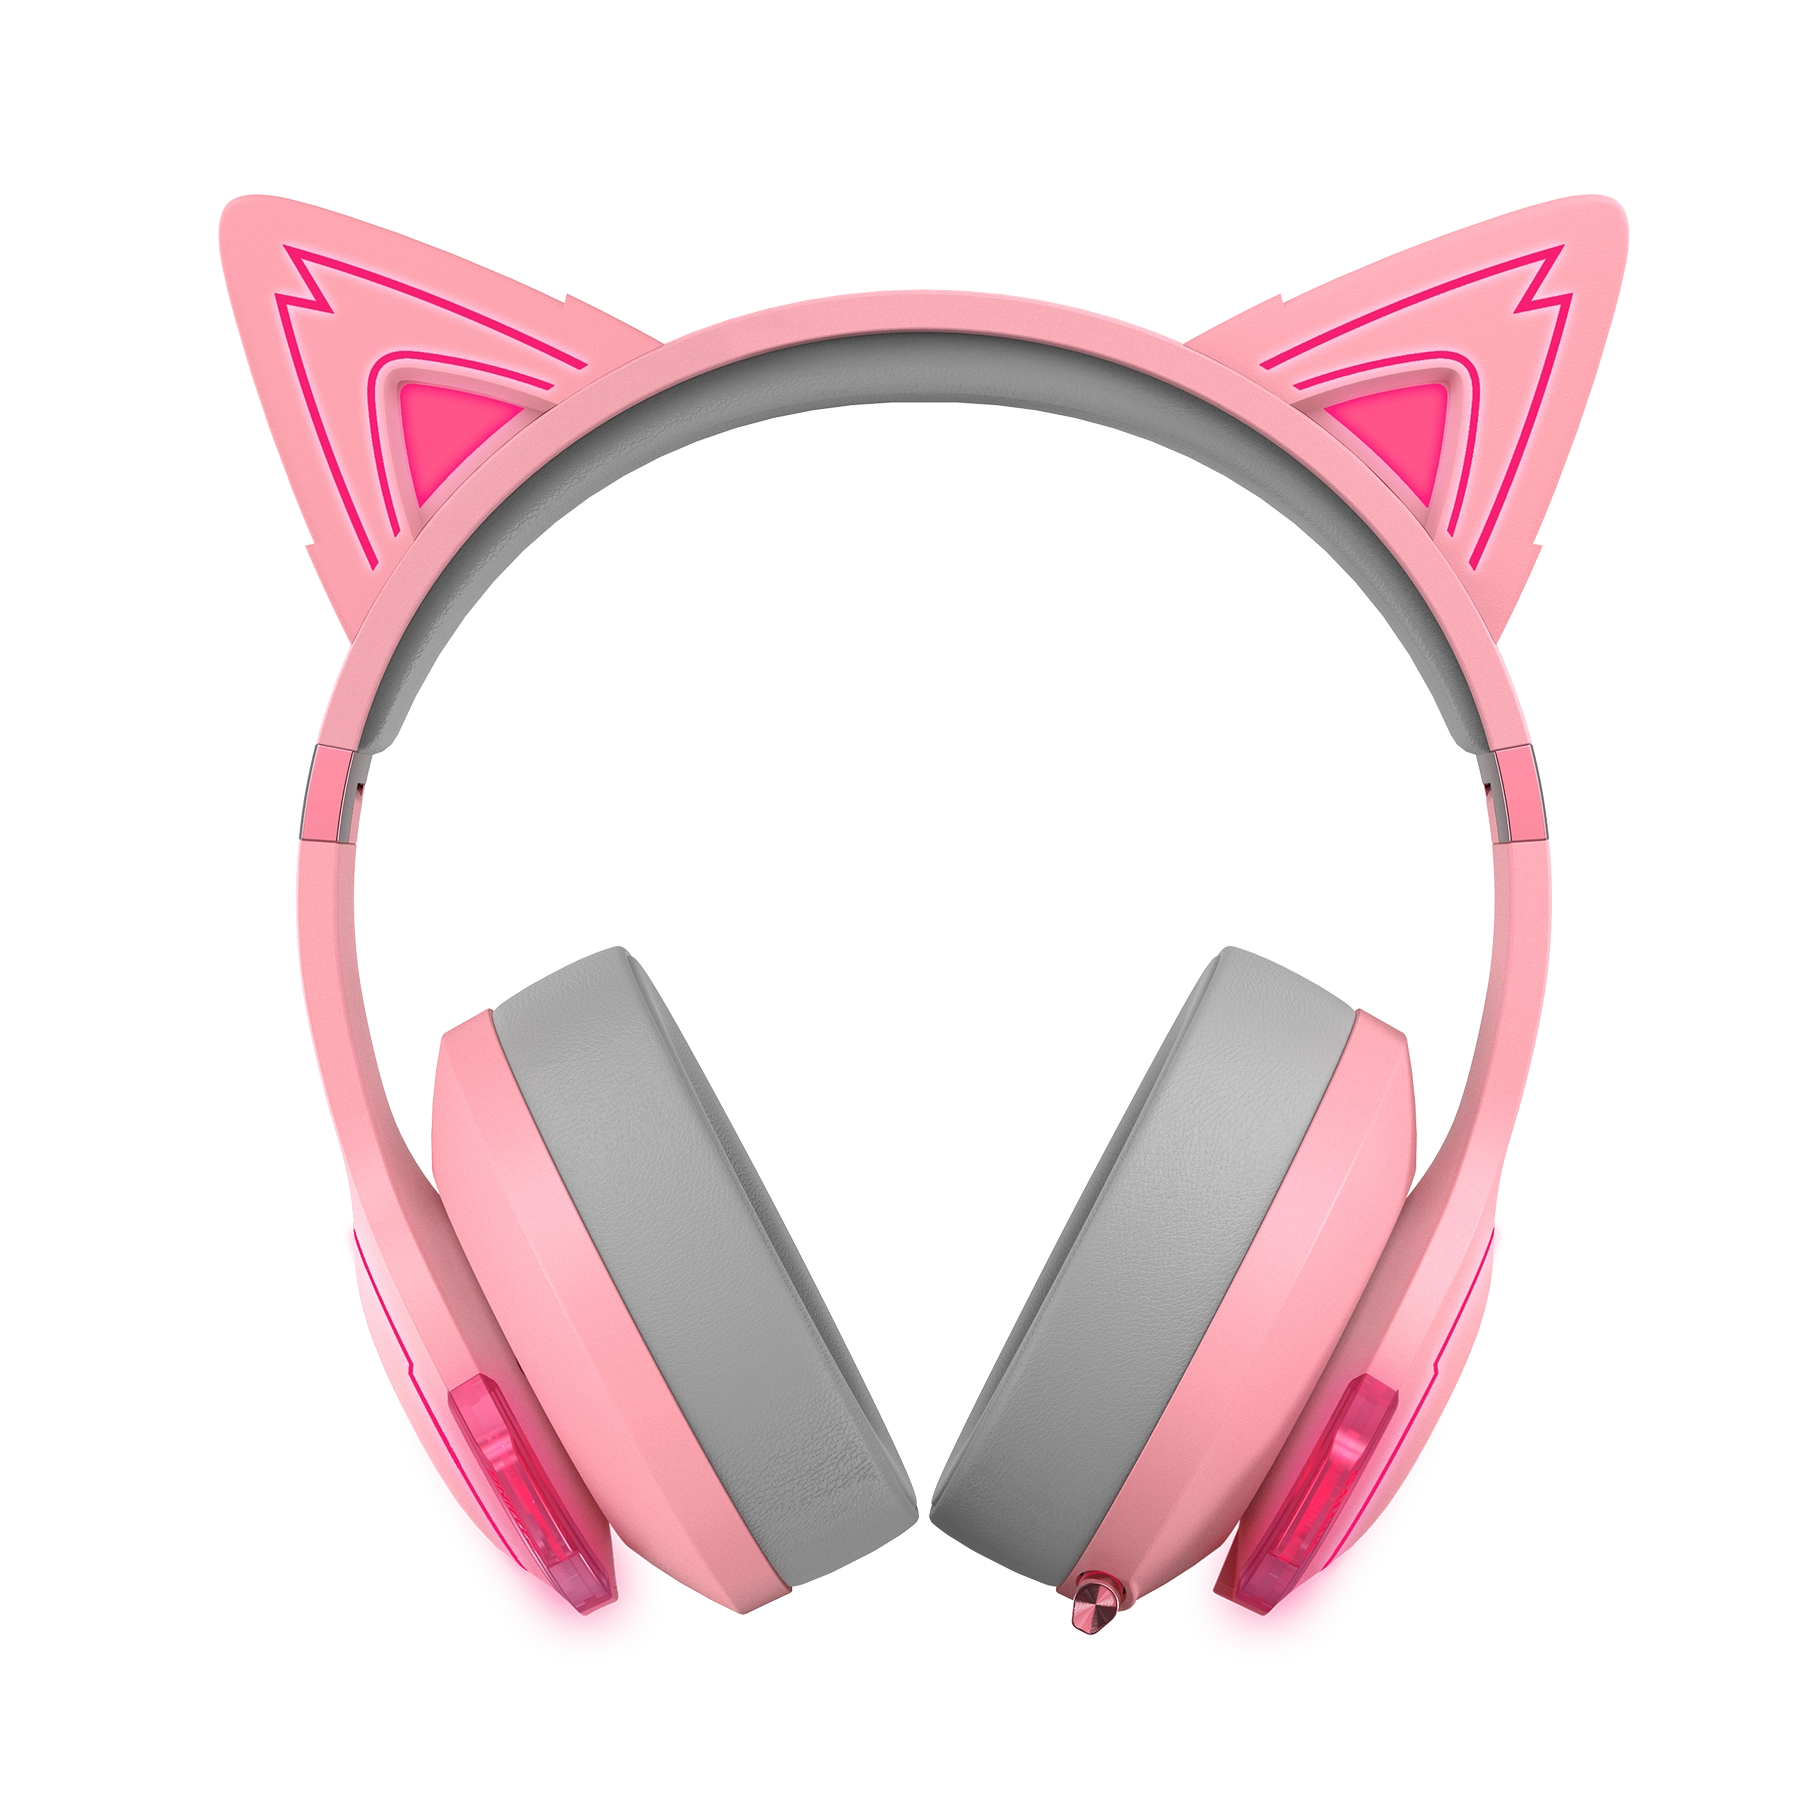 G5BT CAT Headphone product pictures pink_